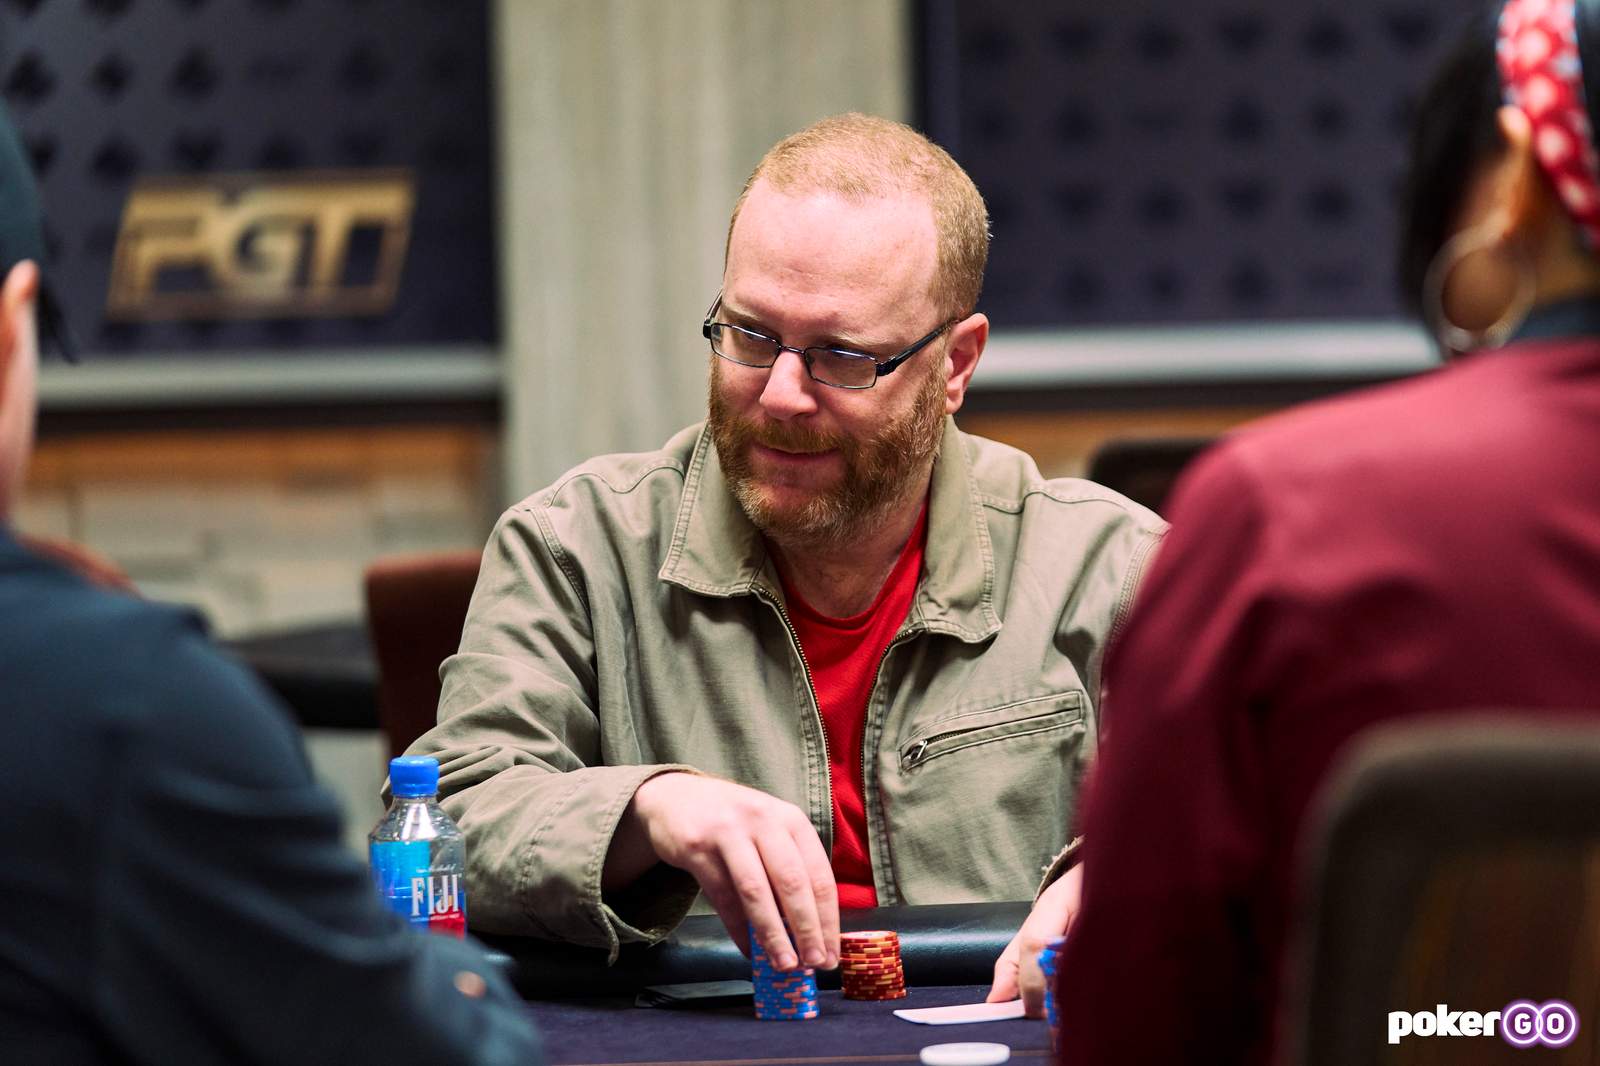 Adam Friedman Makes a Late Surge to Bag the Chip Lead in PGT Mixed Games Event #4: $10,300 Big Bet Mix